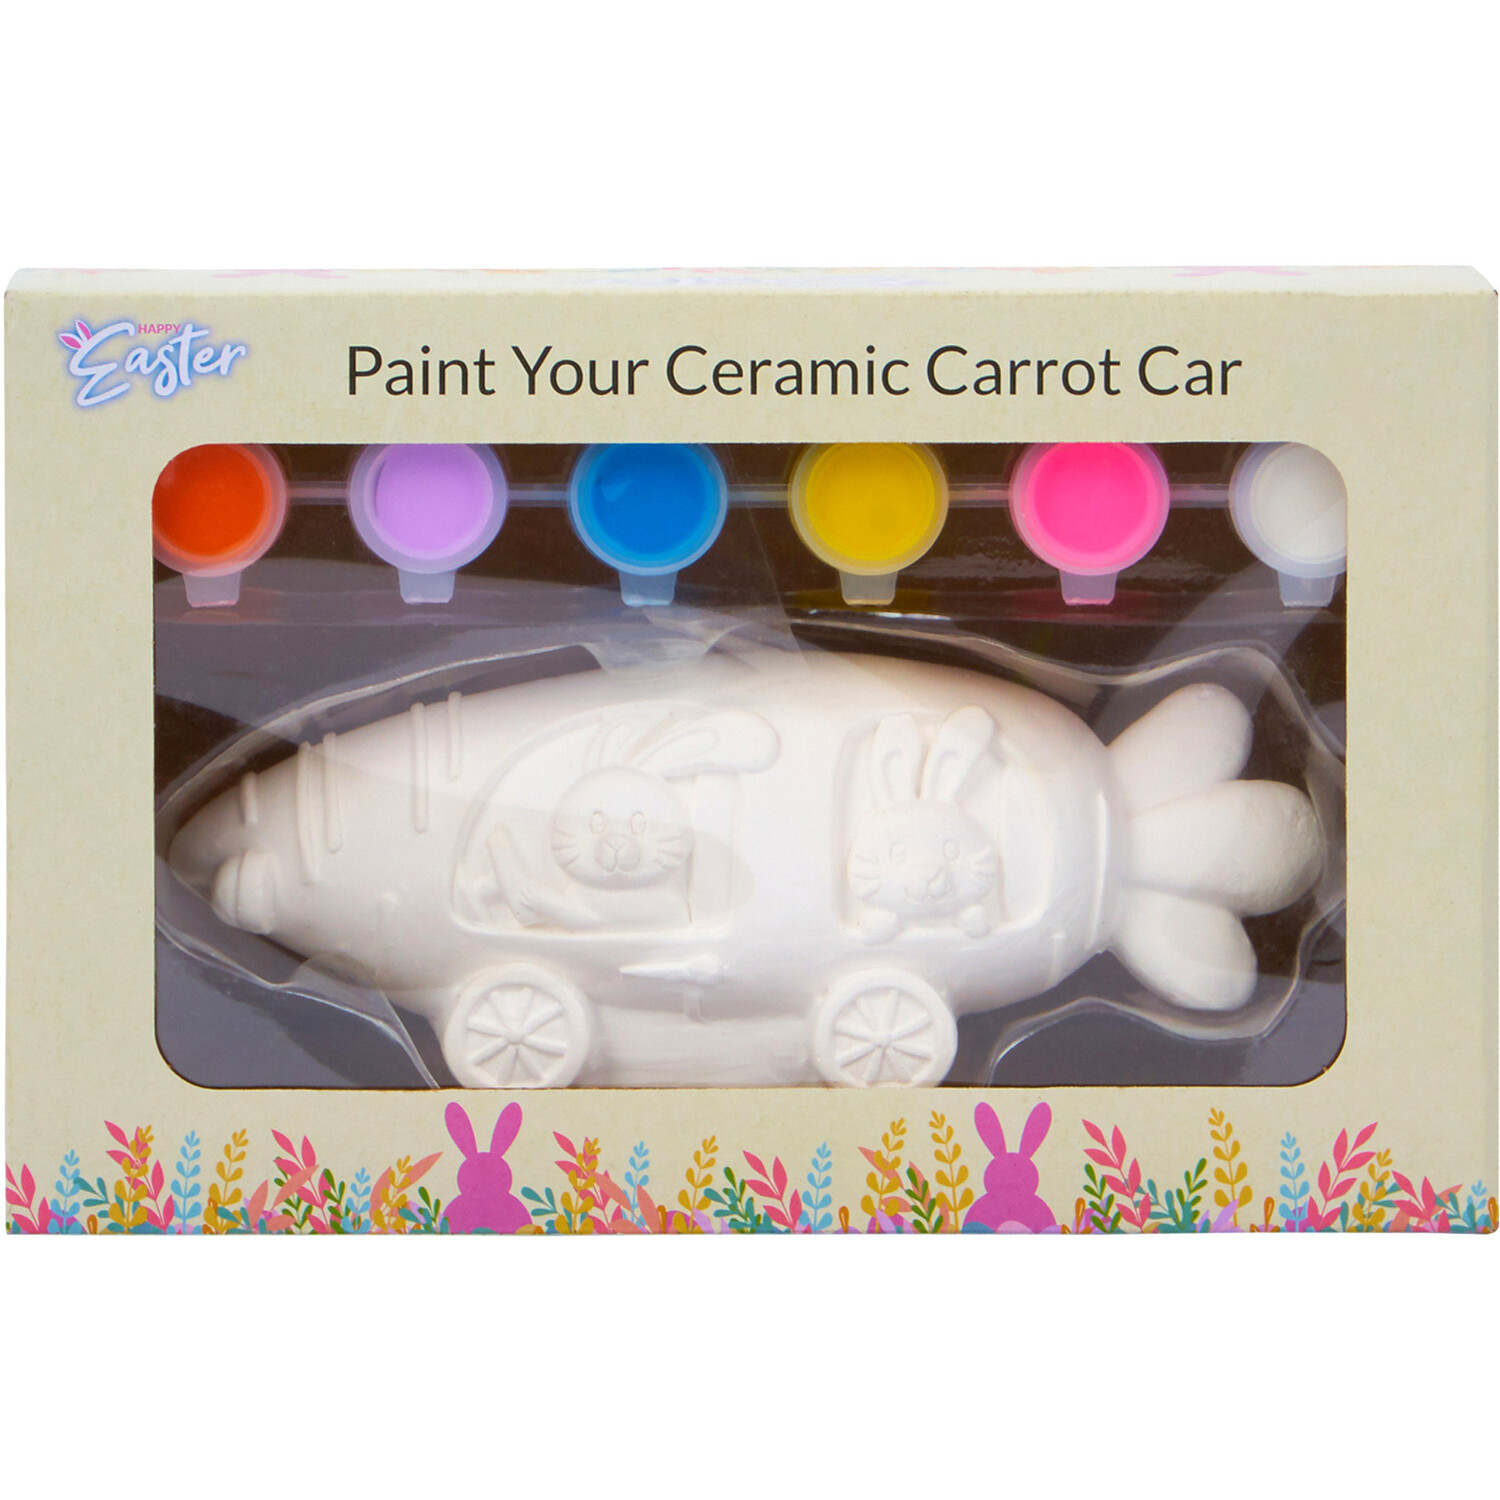 Paint Your Own Ceramic Carrot Car Image 1